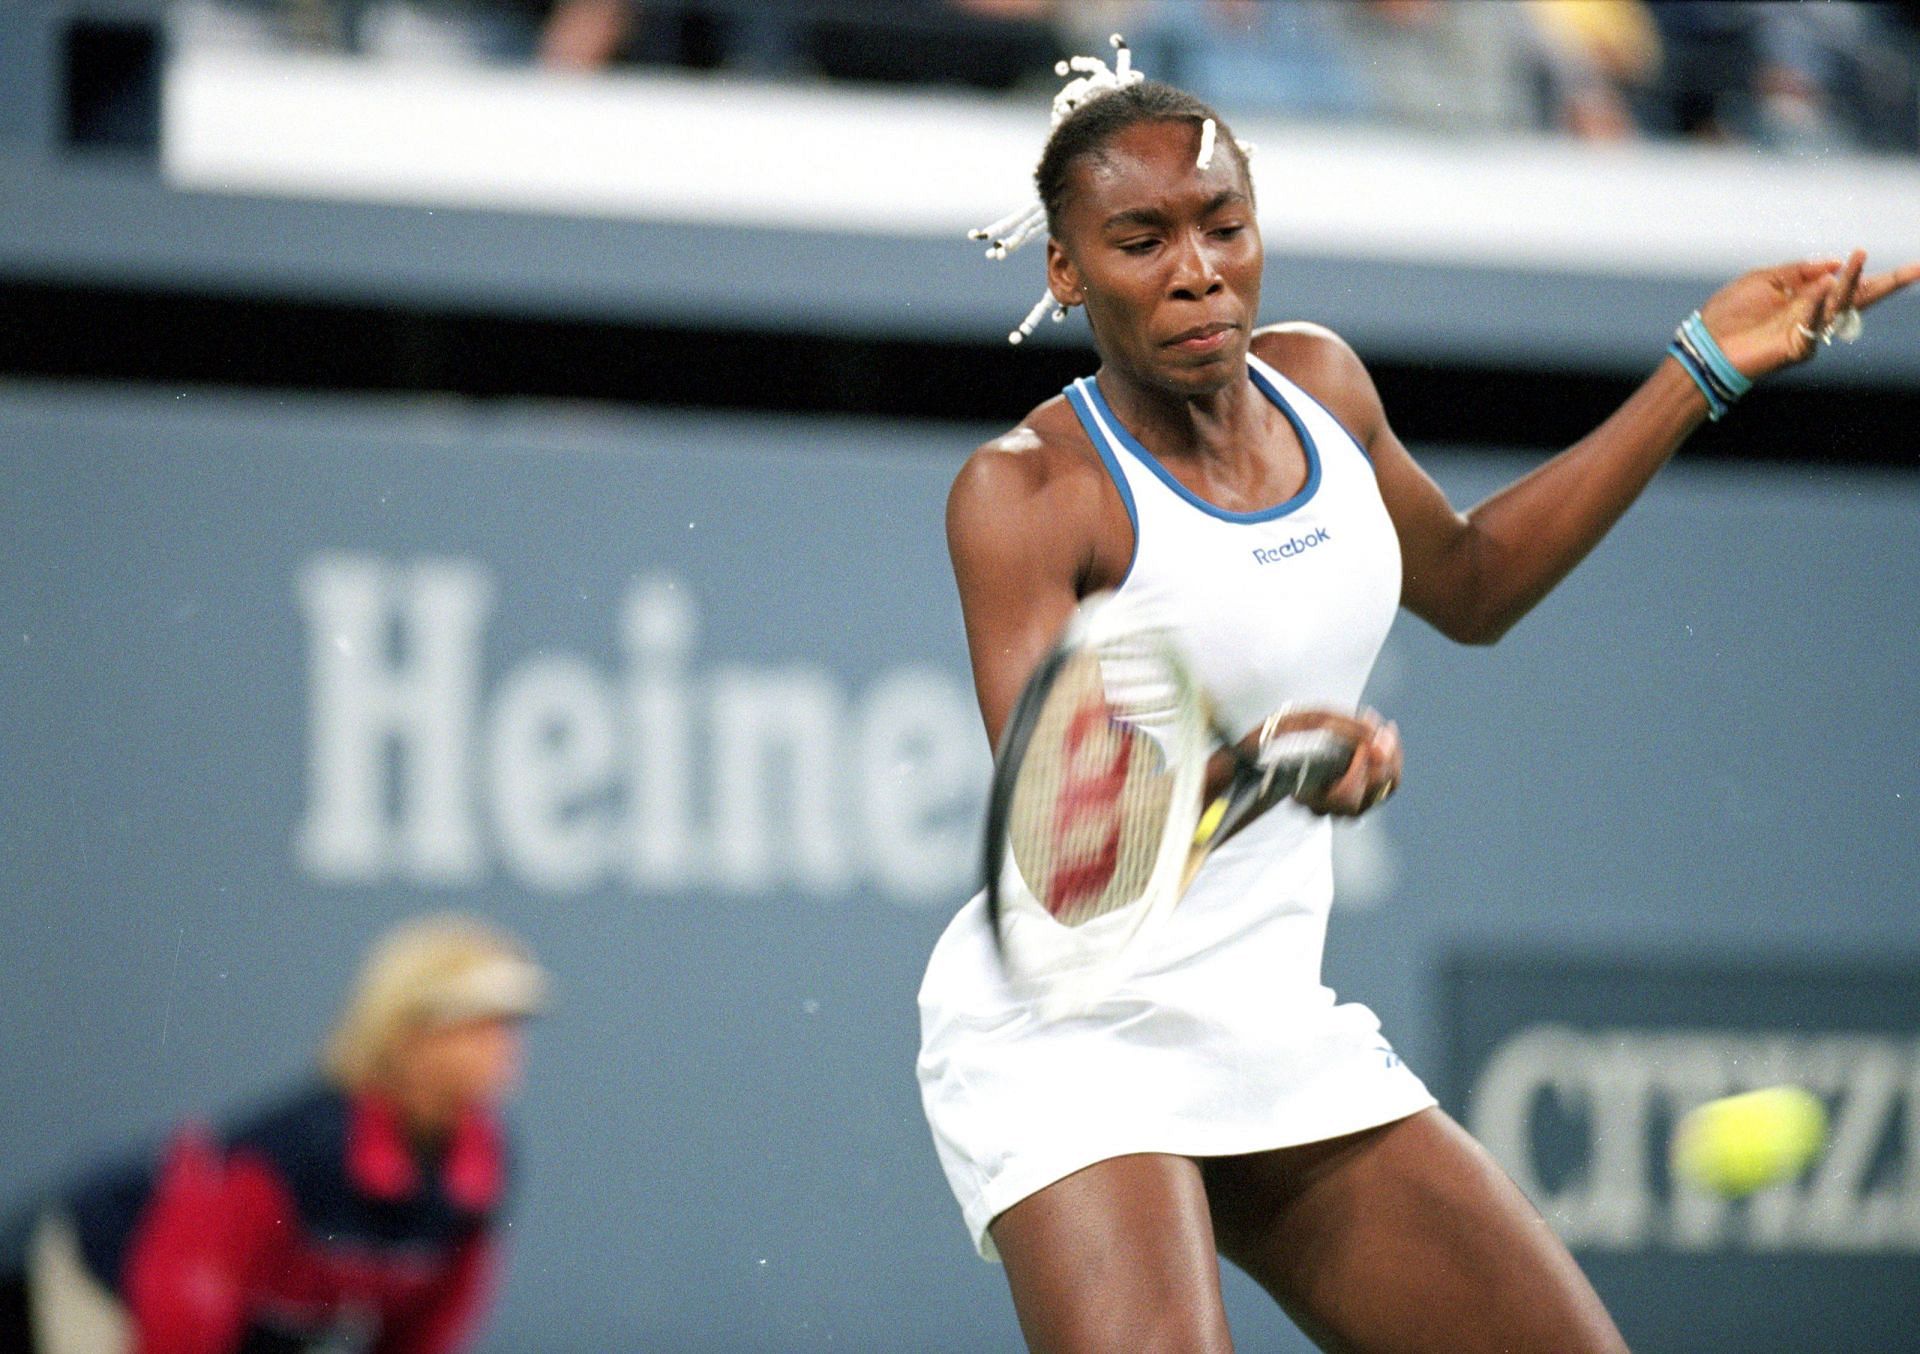 Venus Williams reckoned that she was more mature at 17 years of age than she is now